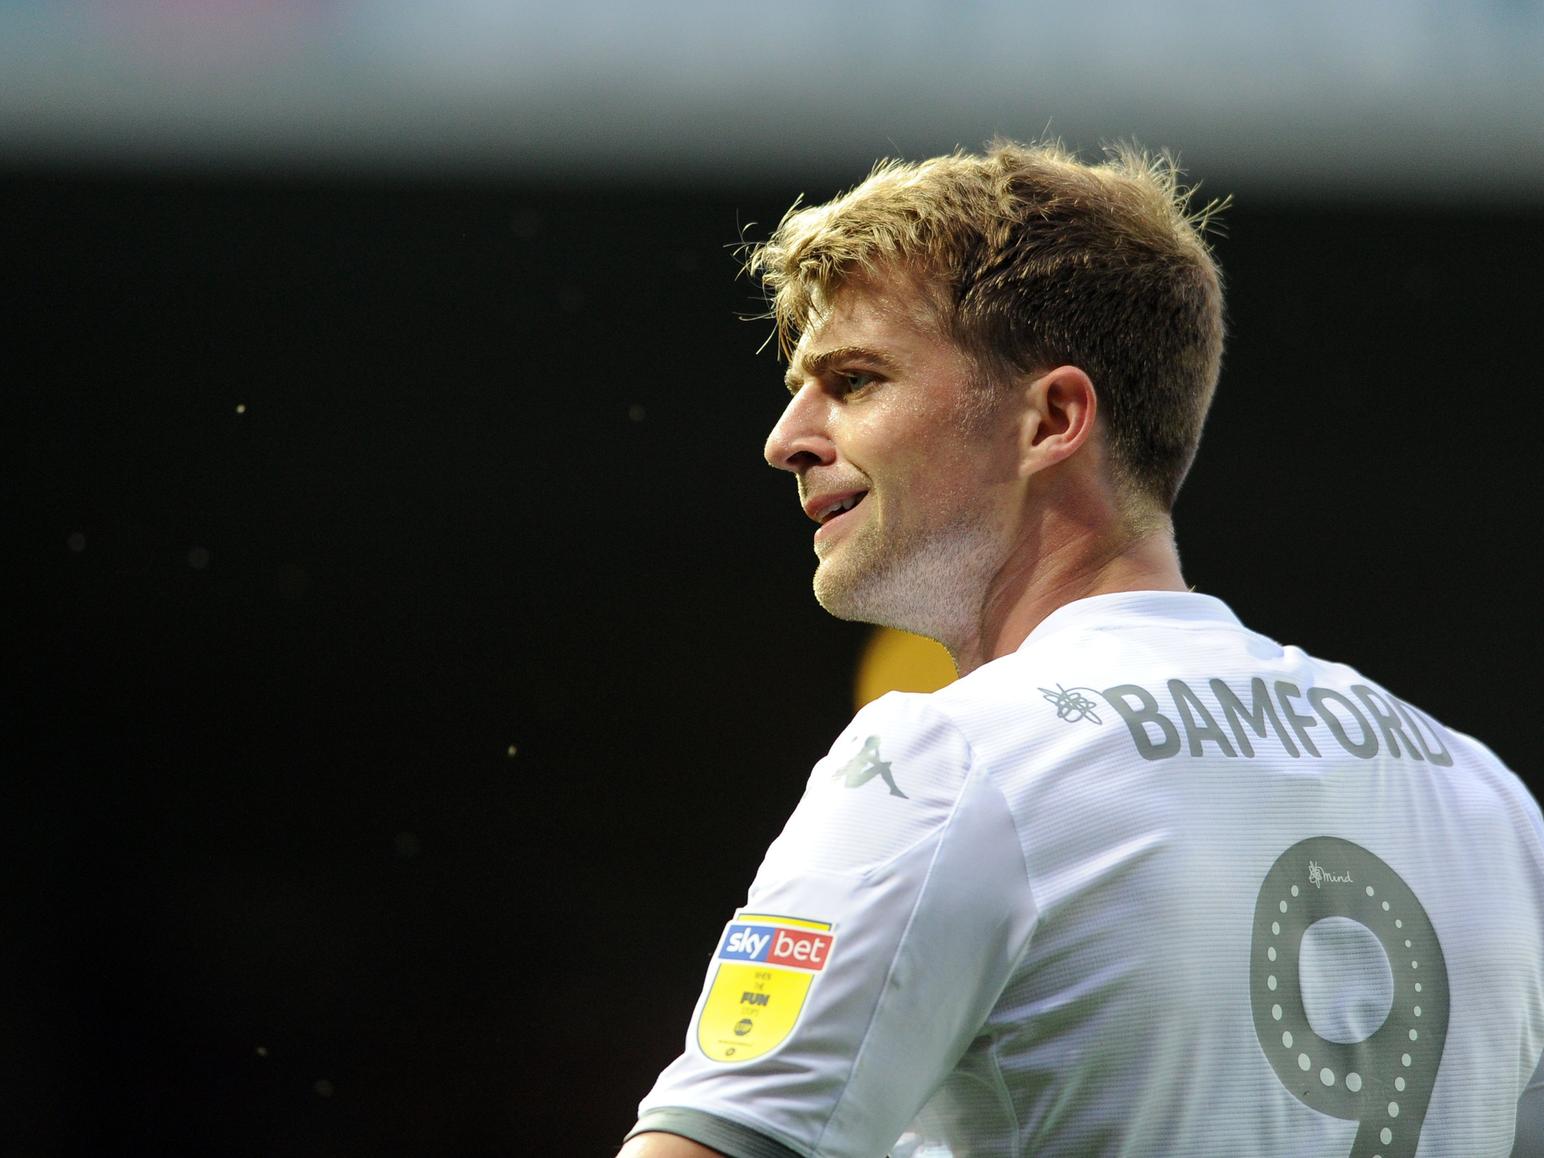 It hasnt always been - and still isnt - plain sailing for Bamford at Leeds, but he was able to silence some of his critics by battling unbelievably well against West Brom. A goal and it would have been a perfect performance.